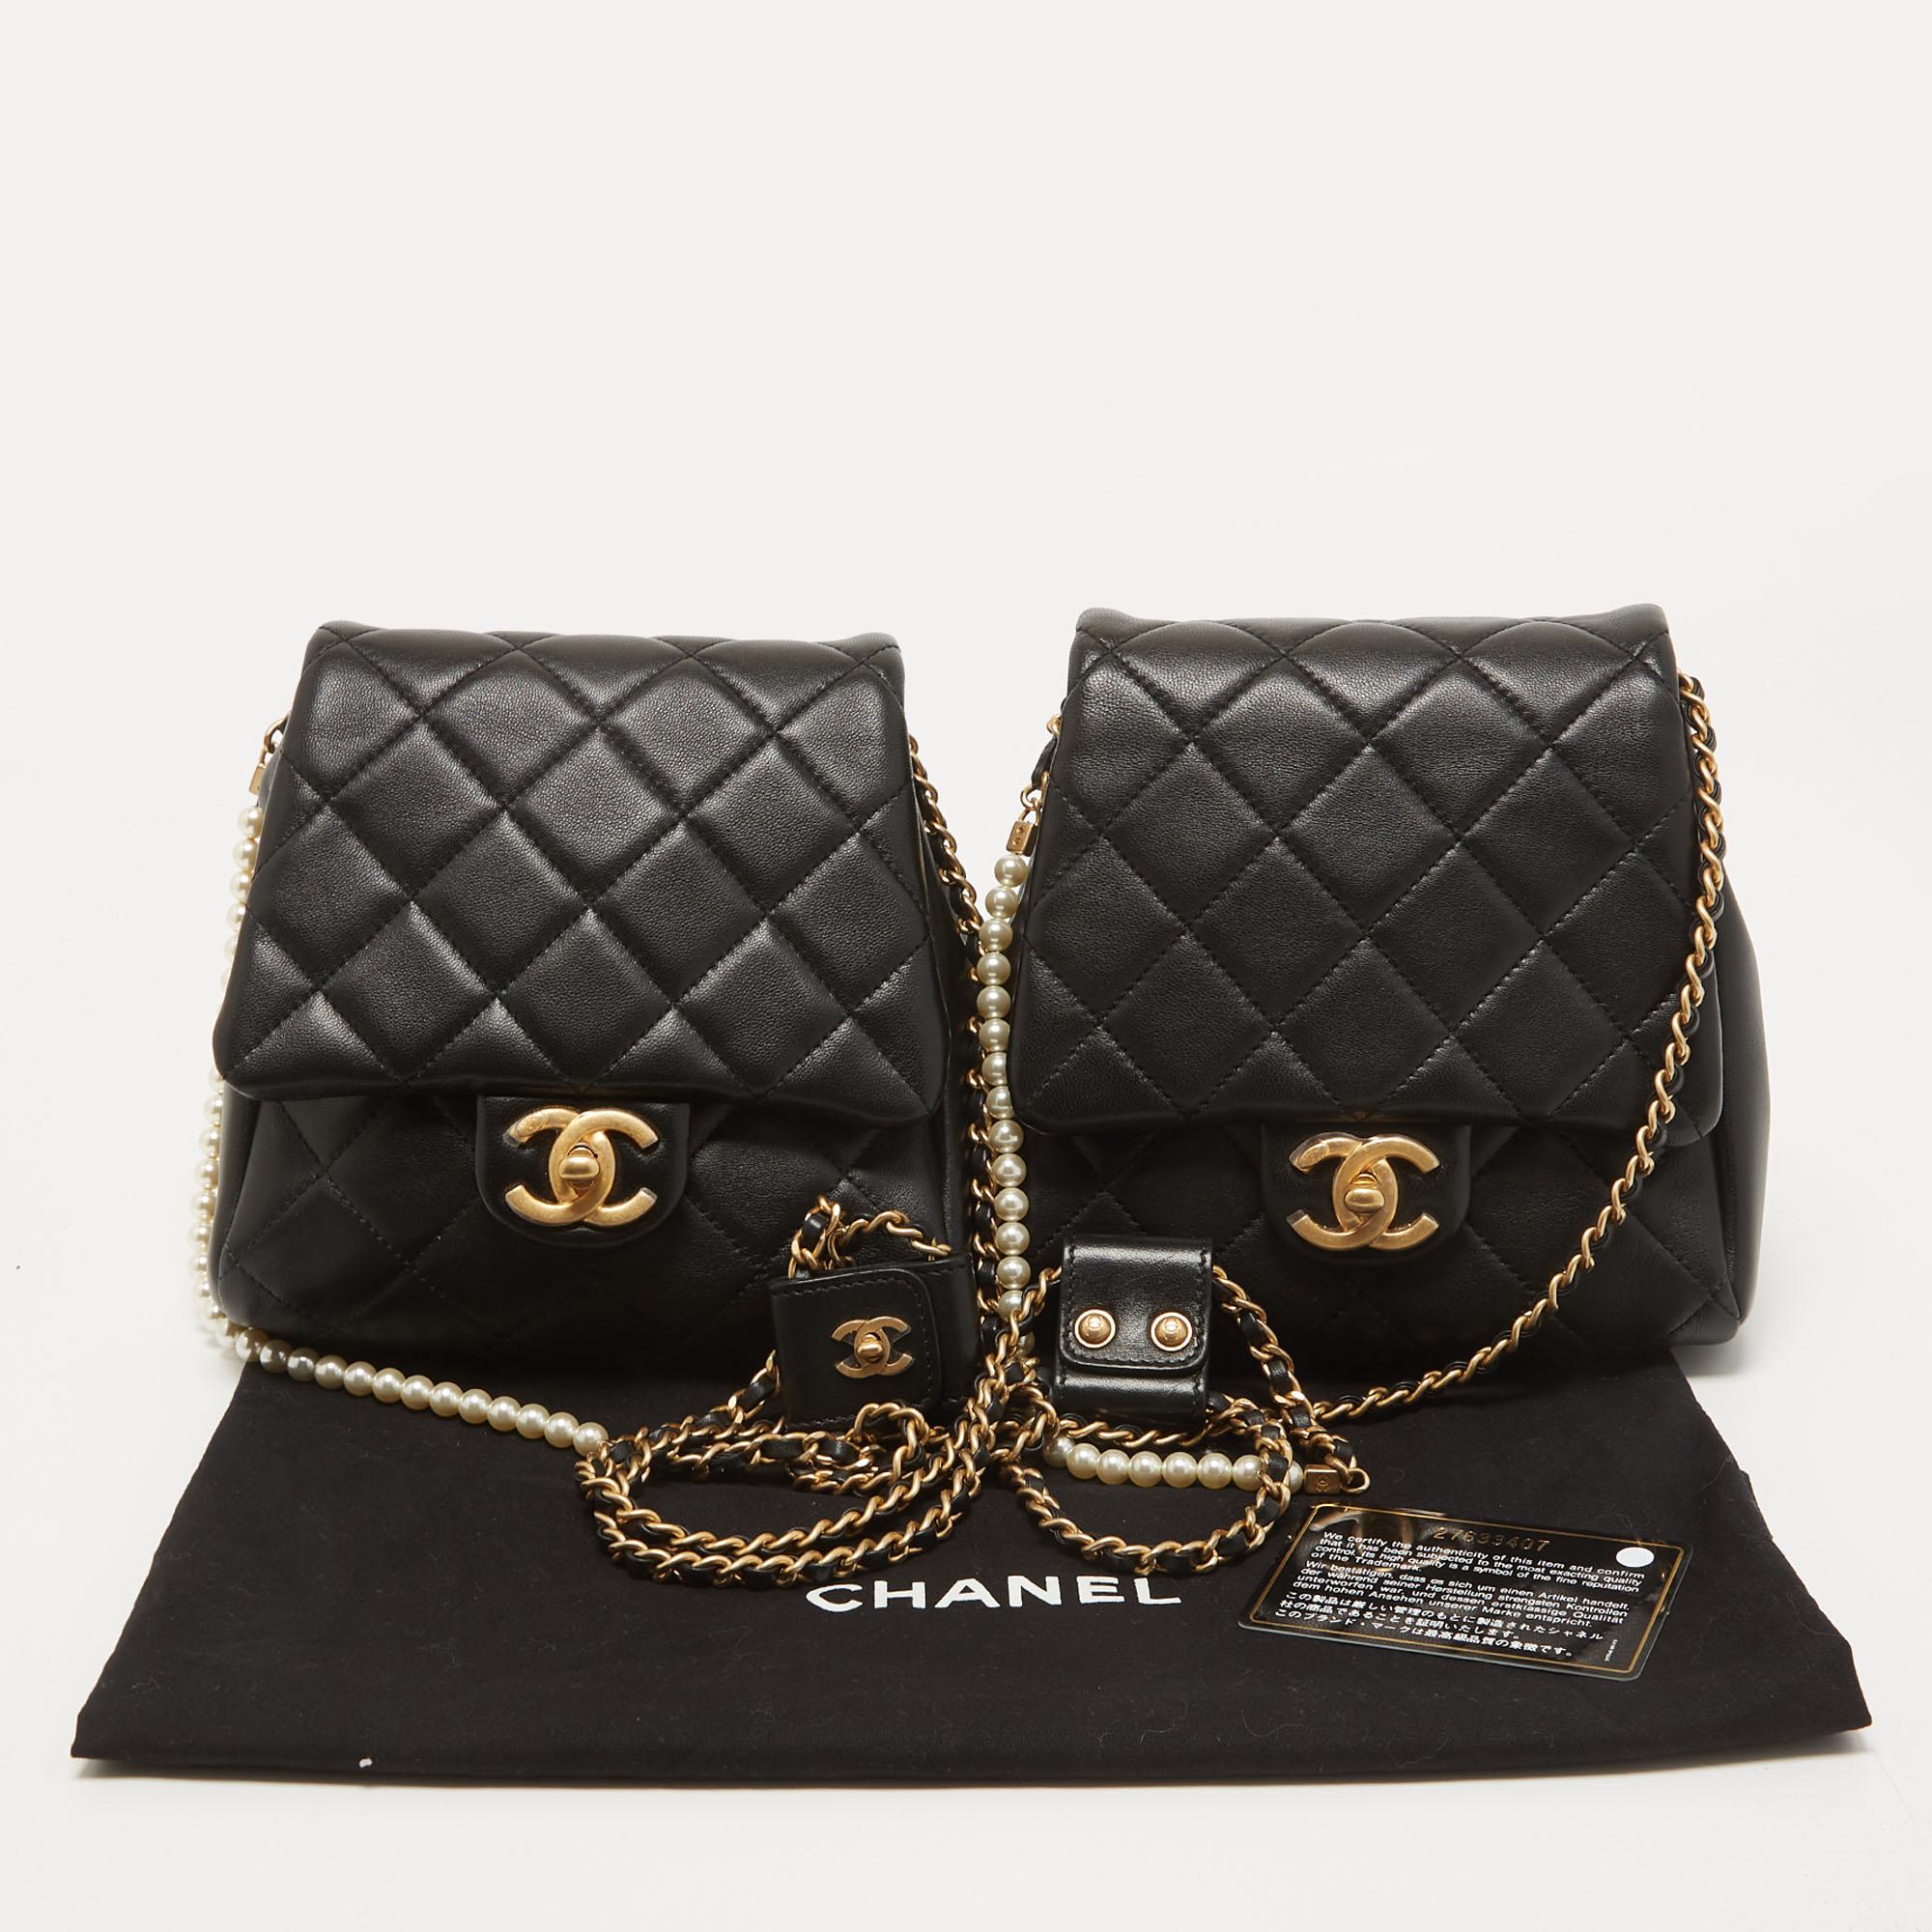 Chanel Black Quilted Leather Side-Packs Crossbody Bag 4